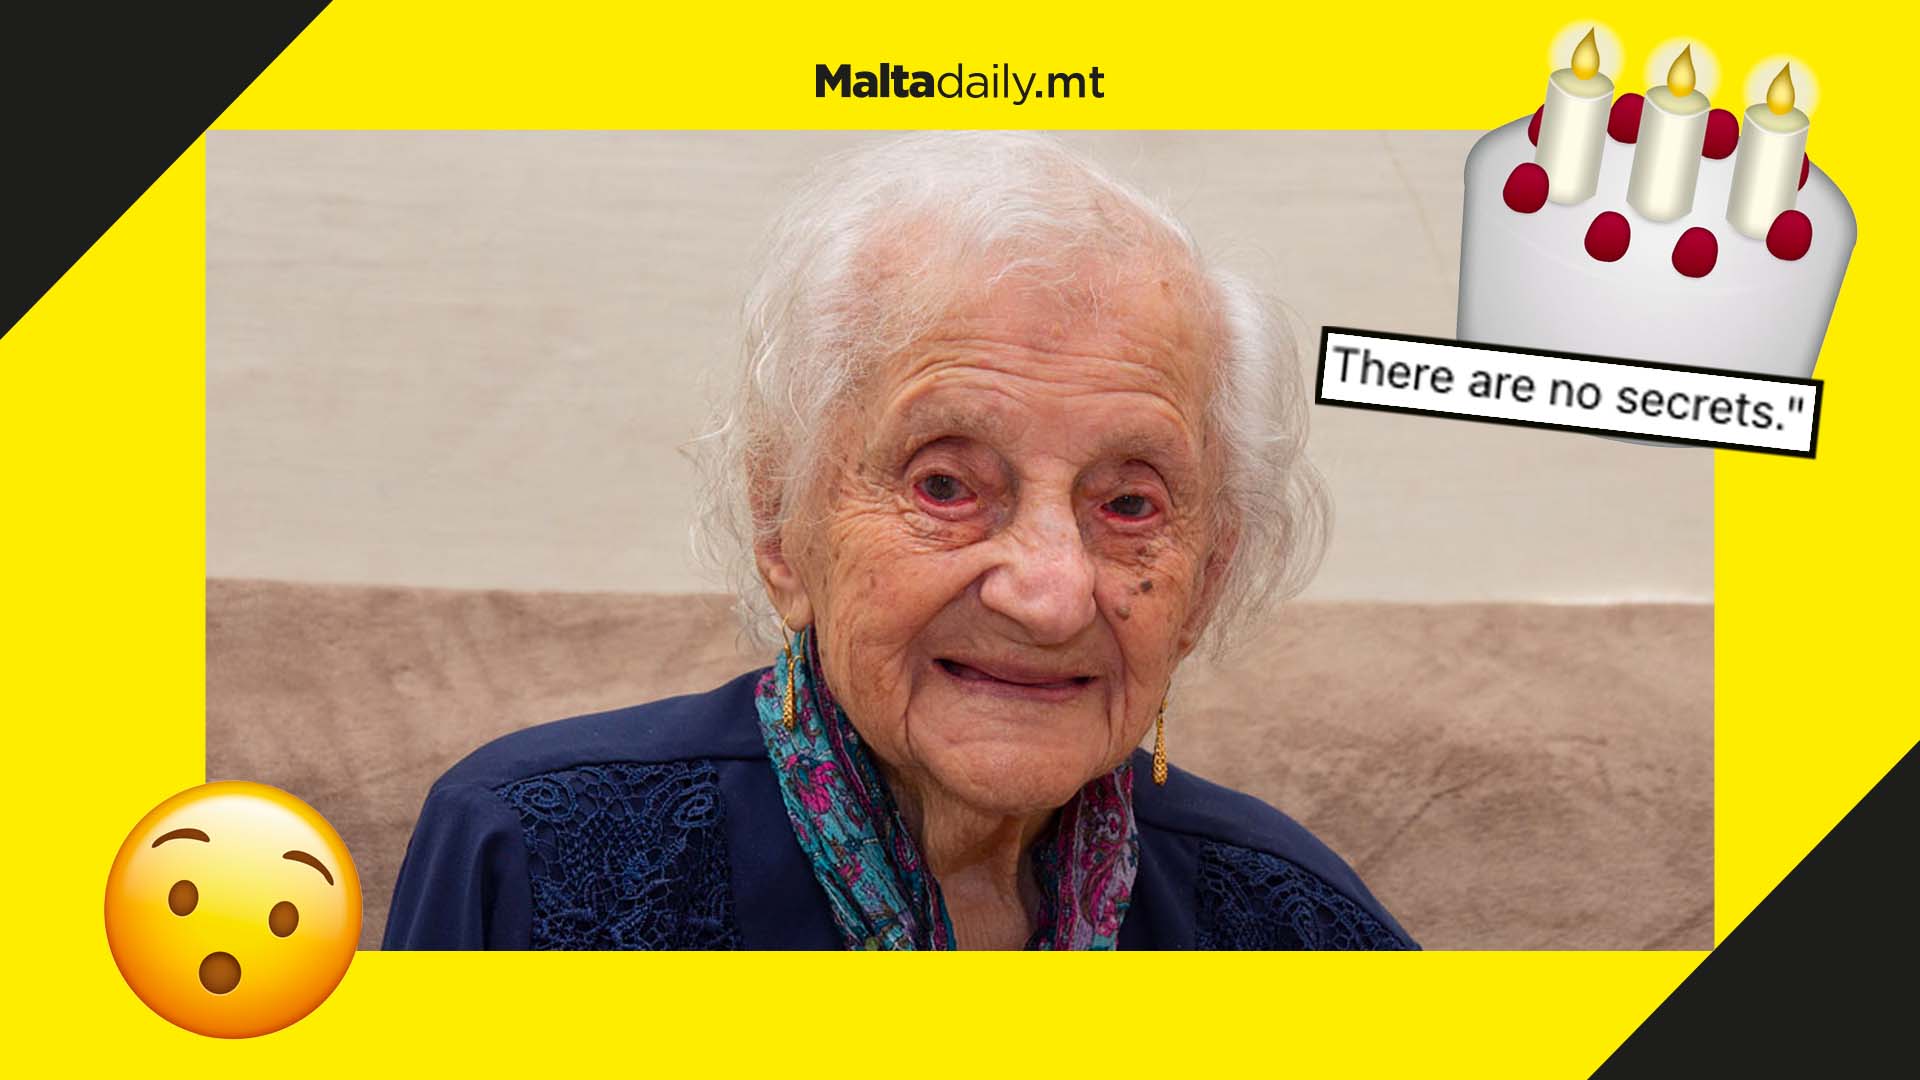 The oldest woman in Malta celebrates her 110th birthday